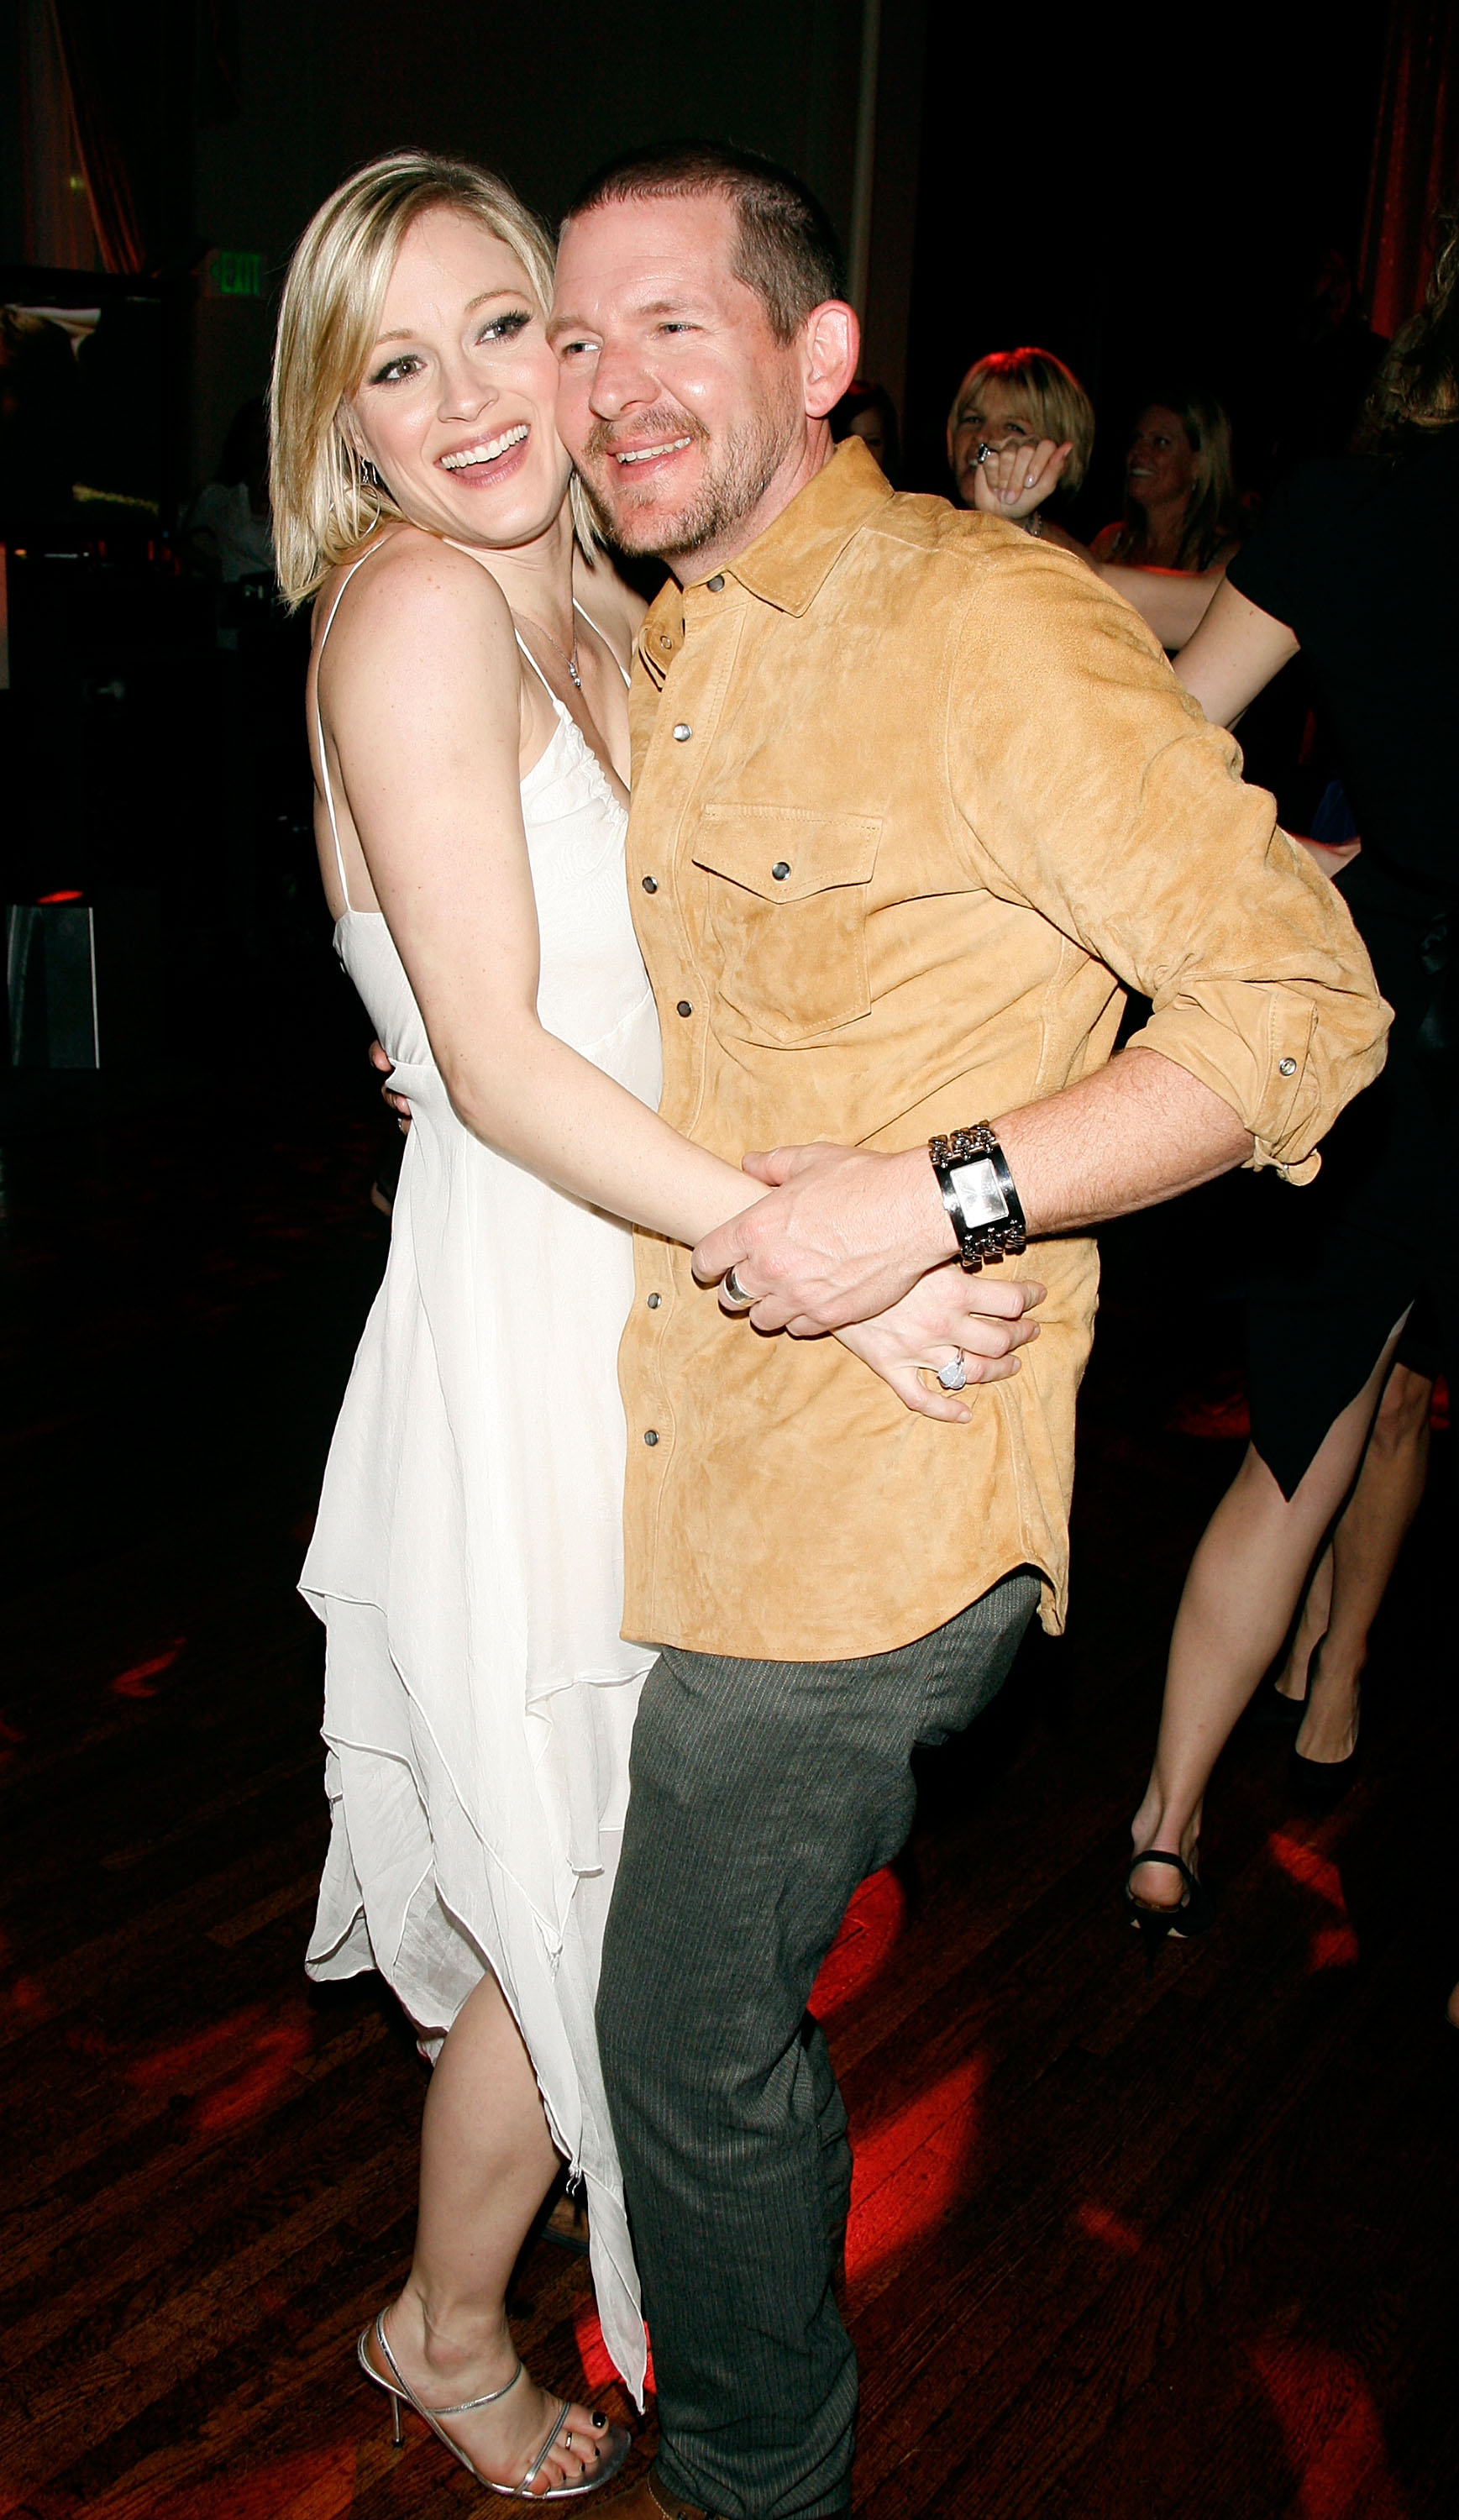 Teri Polo and musician Jamie Wollam attend the after party reception of Fox's "The Wedding Bells" held at The Wilshire Ebell Theatre on March 9, 2007, in Los Angeles, California. | Source: Getty Images